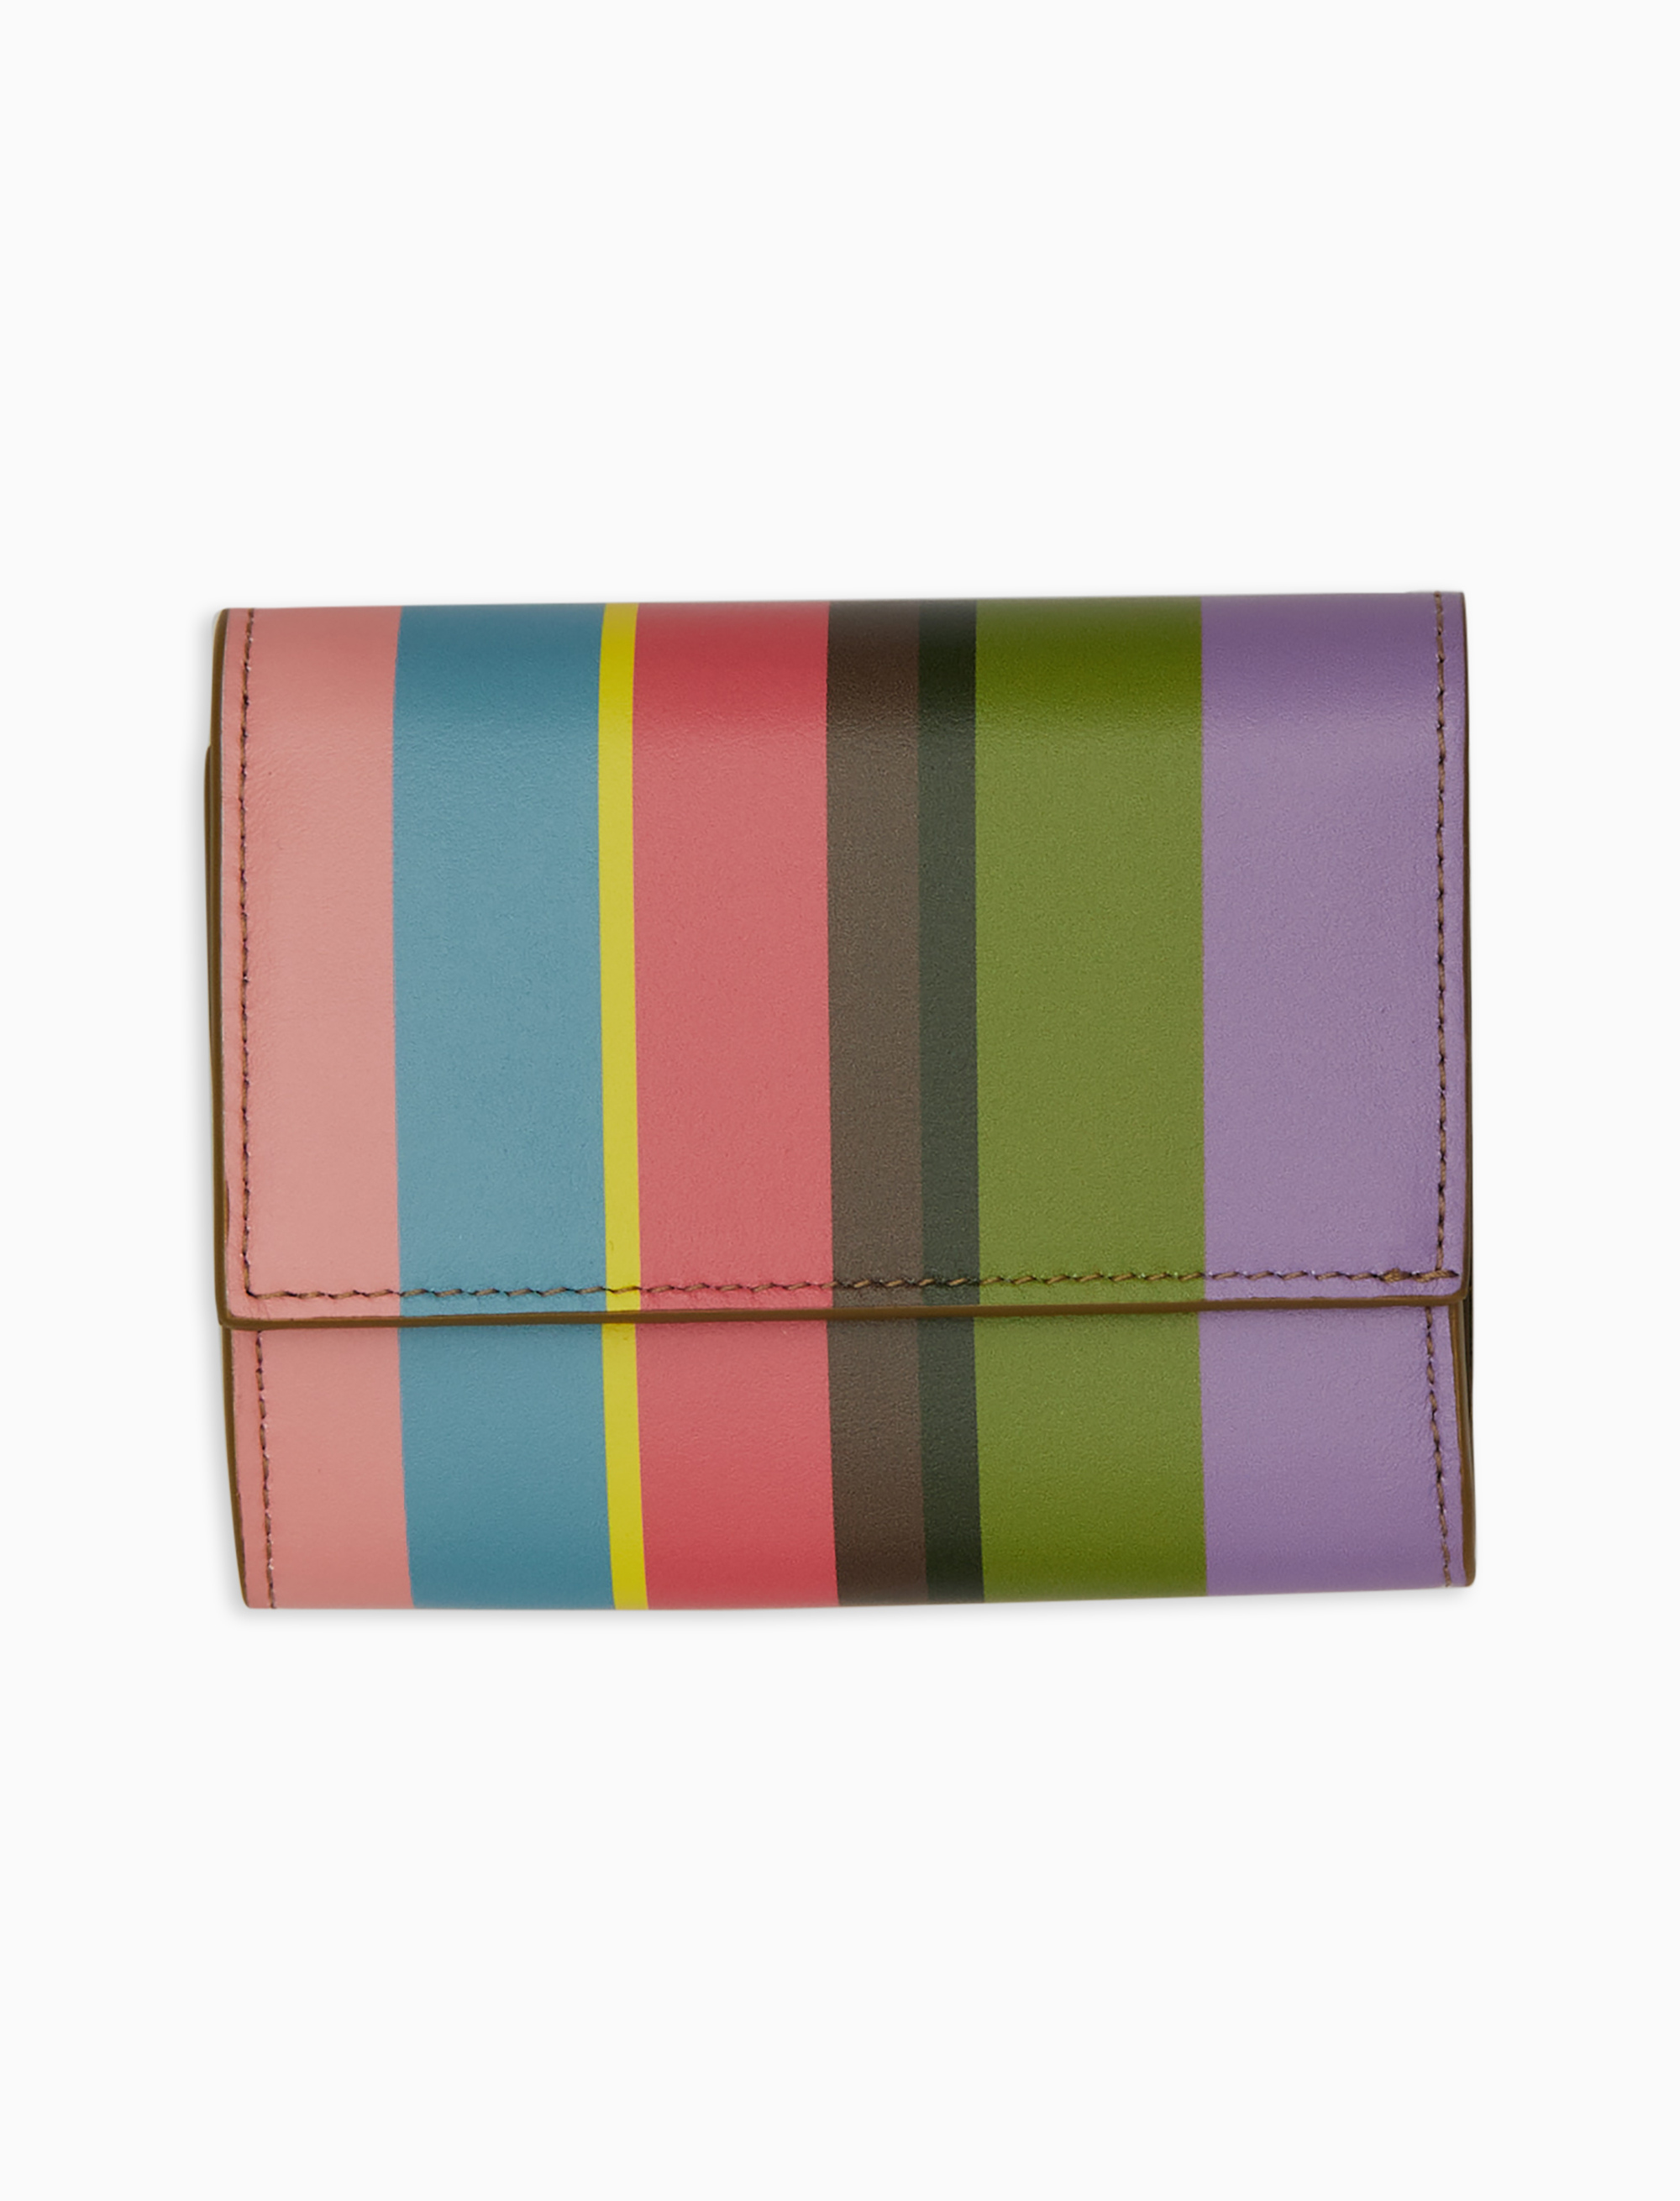 Buy Multi Coloured Wallet for Ladies Button Purse Colorful Purse for Ladies  RFID Blocking Womens Wallet / Purse Genuine Leather SP31 Online in India -  Etsy